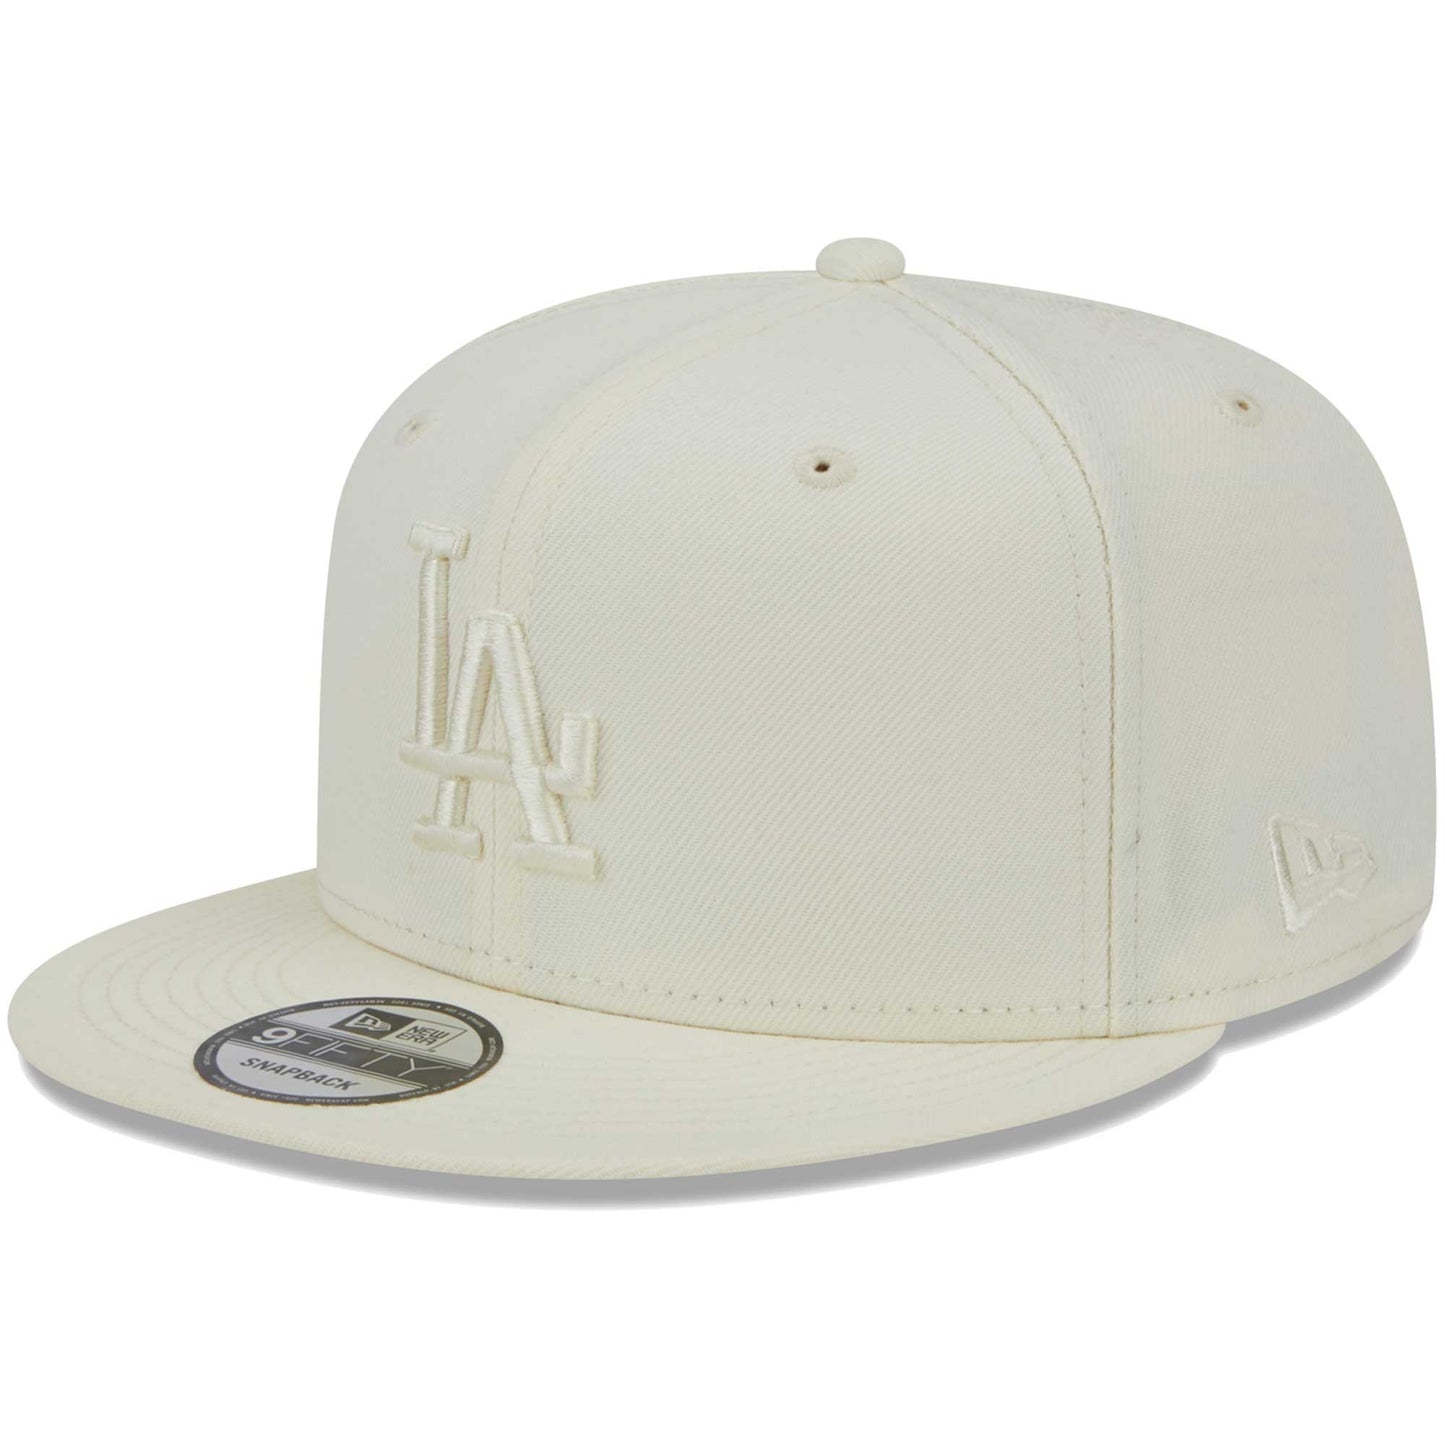 Los Angeles Dodgers New Era Spring Color Basic 9FIFTY Snapback Hat - Cream